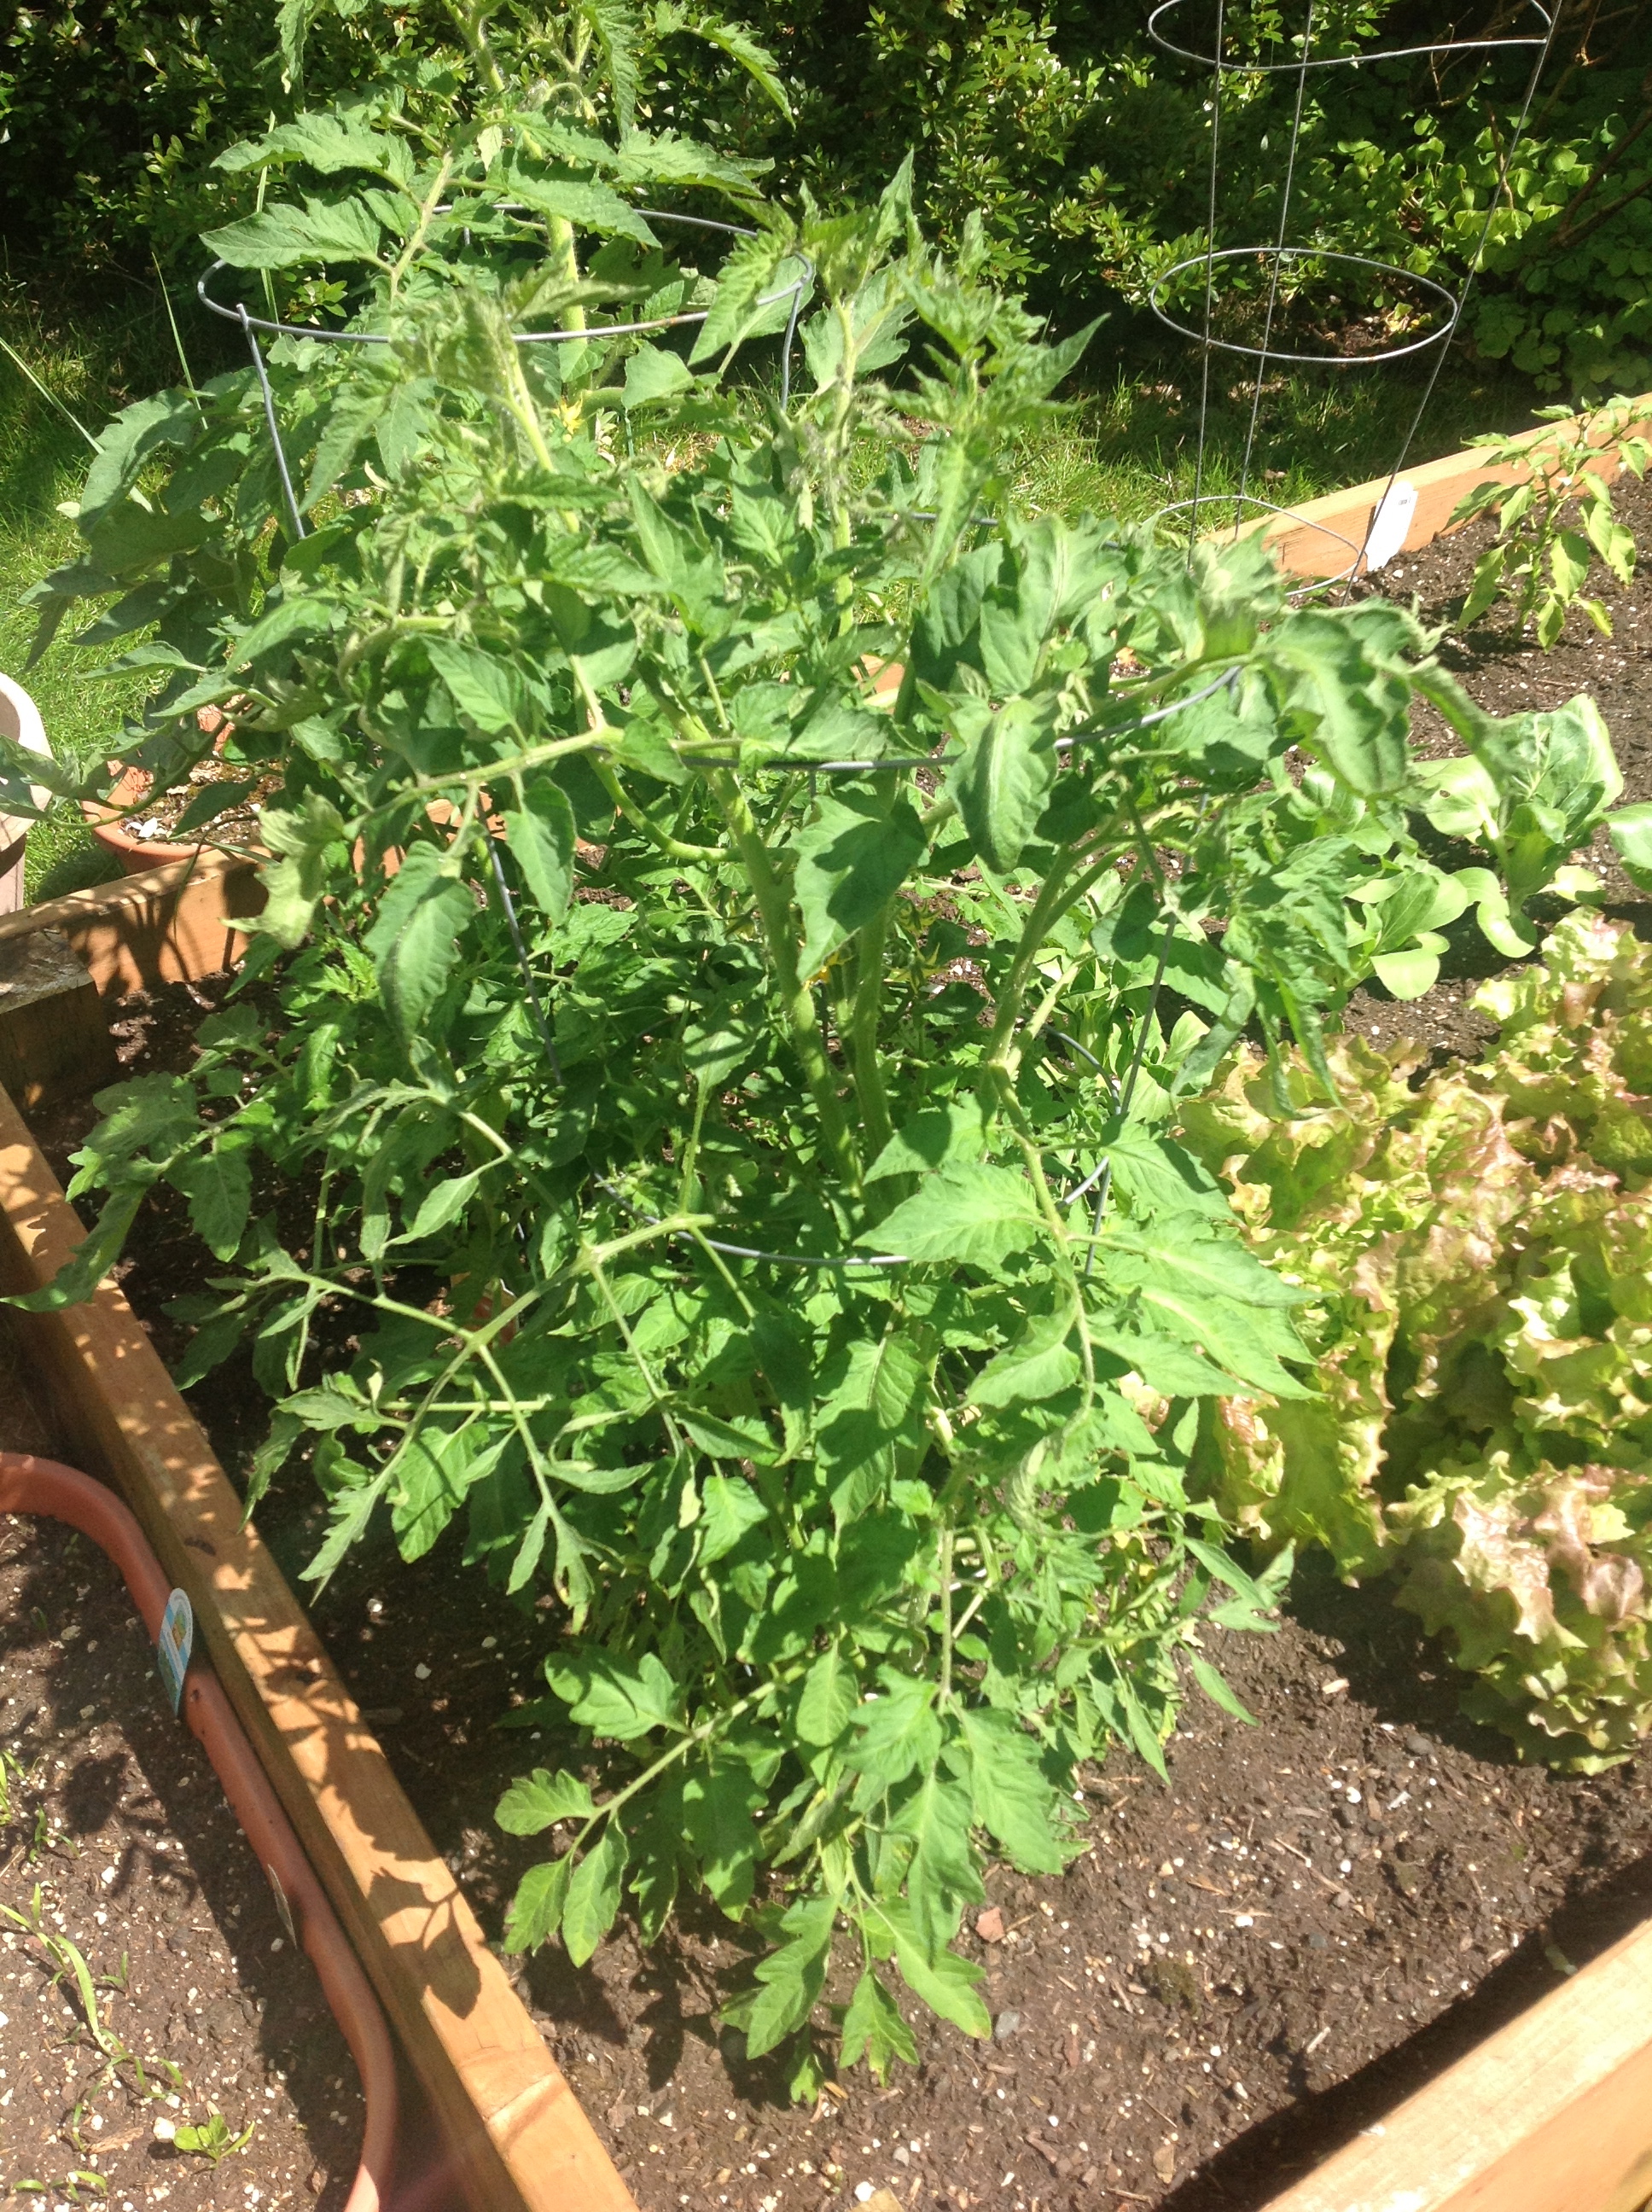 my tomatoes are doing well too.